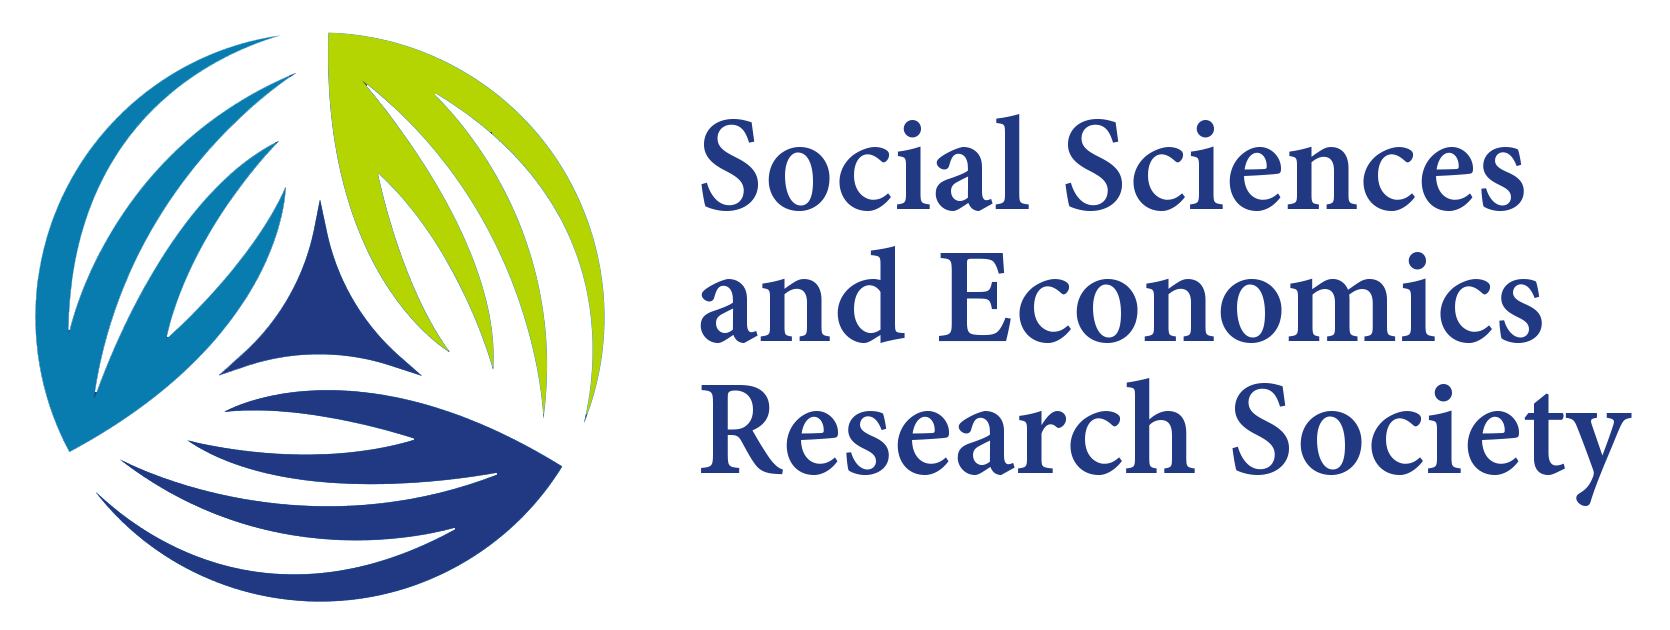 SSERS 4th International Conference on  Social Sciences, Economics, Business Management & Humanities